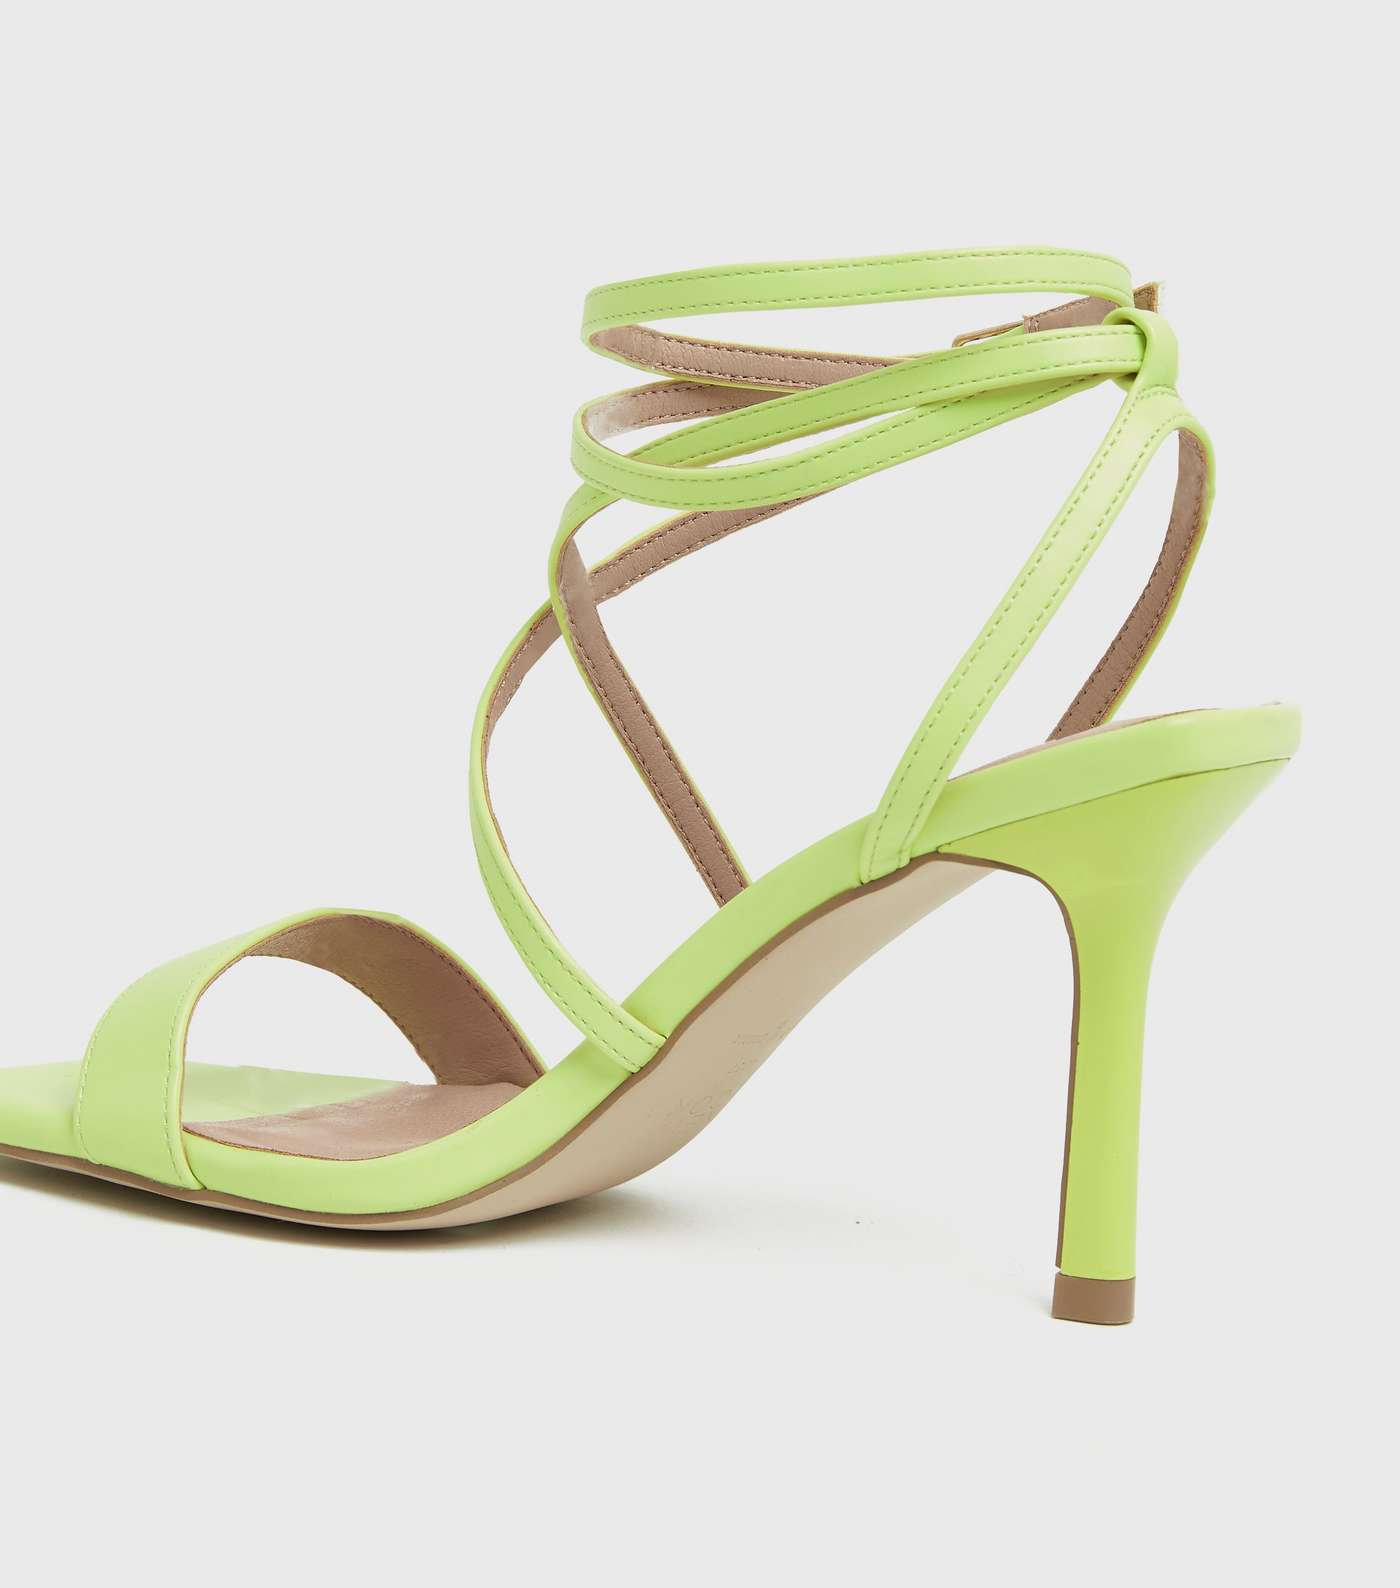 Green Leather-Look Strappy Stiletto Heel Sandals Image 4